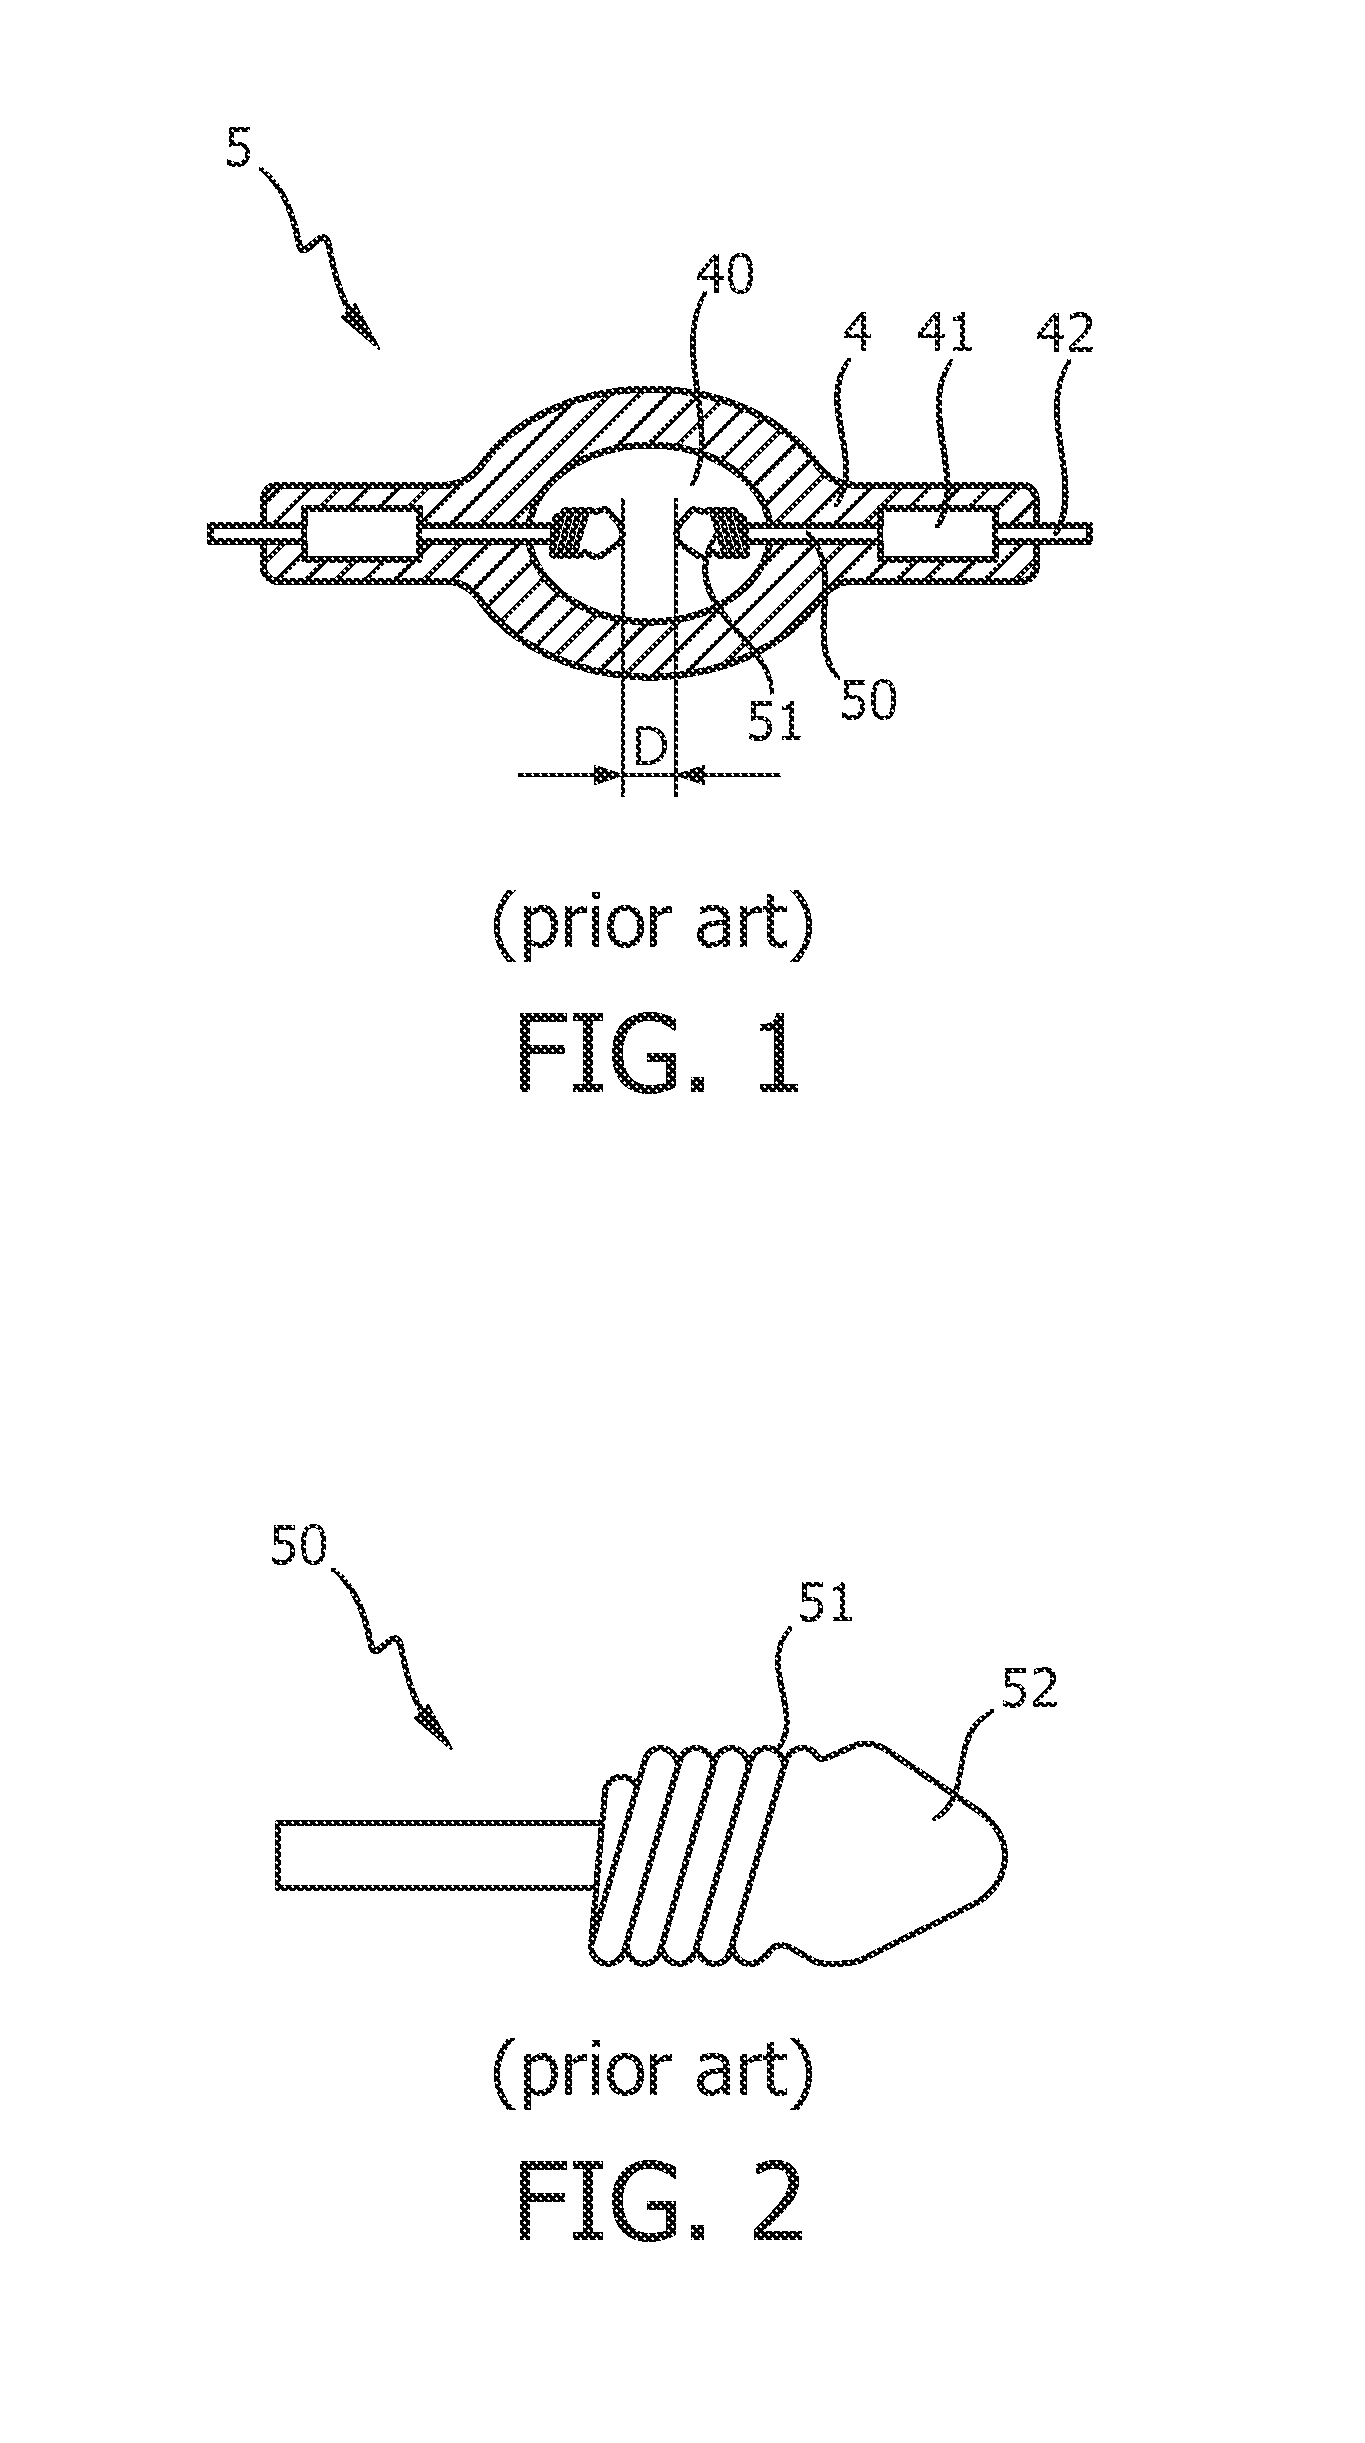 Method of manufacturing an electrode for a gas discharge lamp